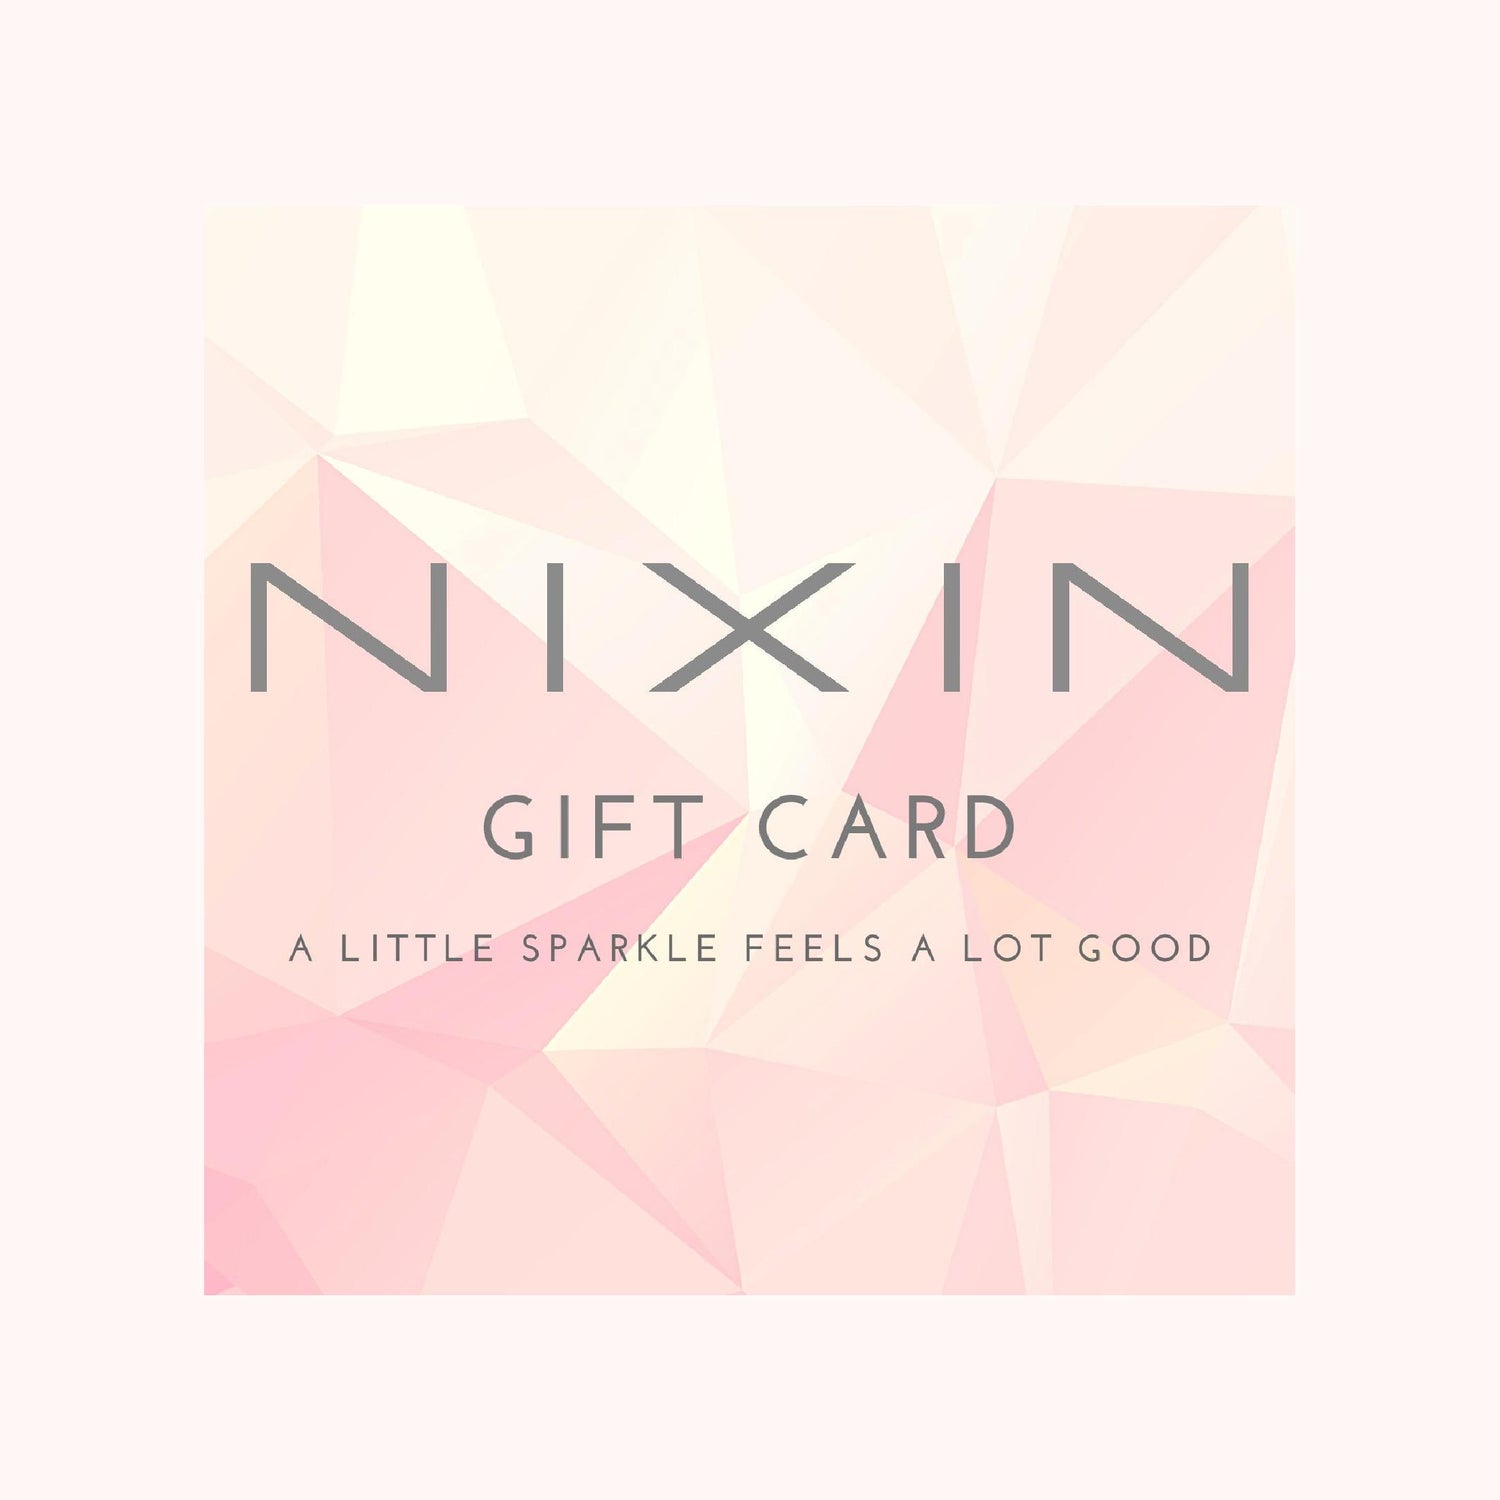 NIXIN Jewelry Gift Card Image. A jewelry gift to pick their own opal jewelry.